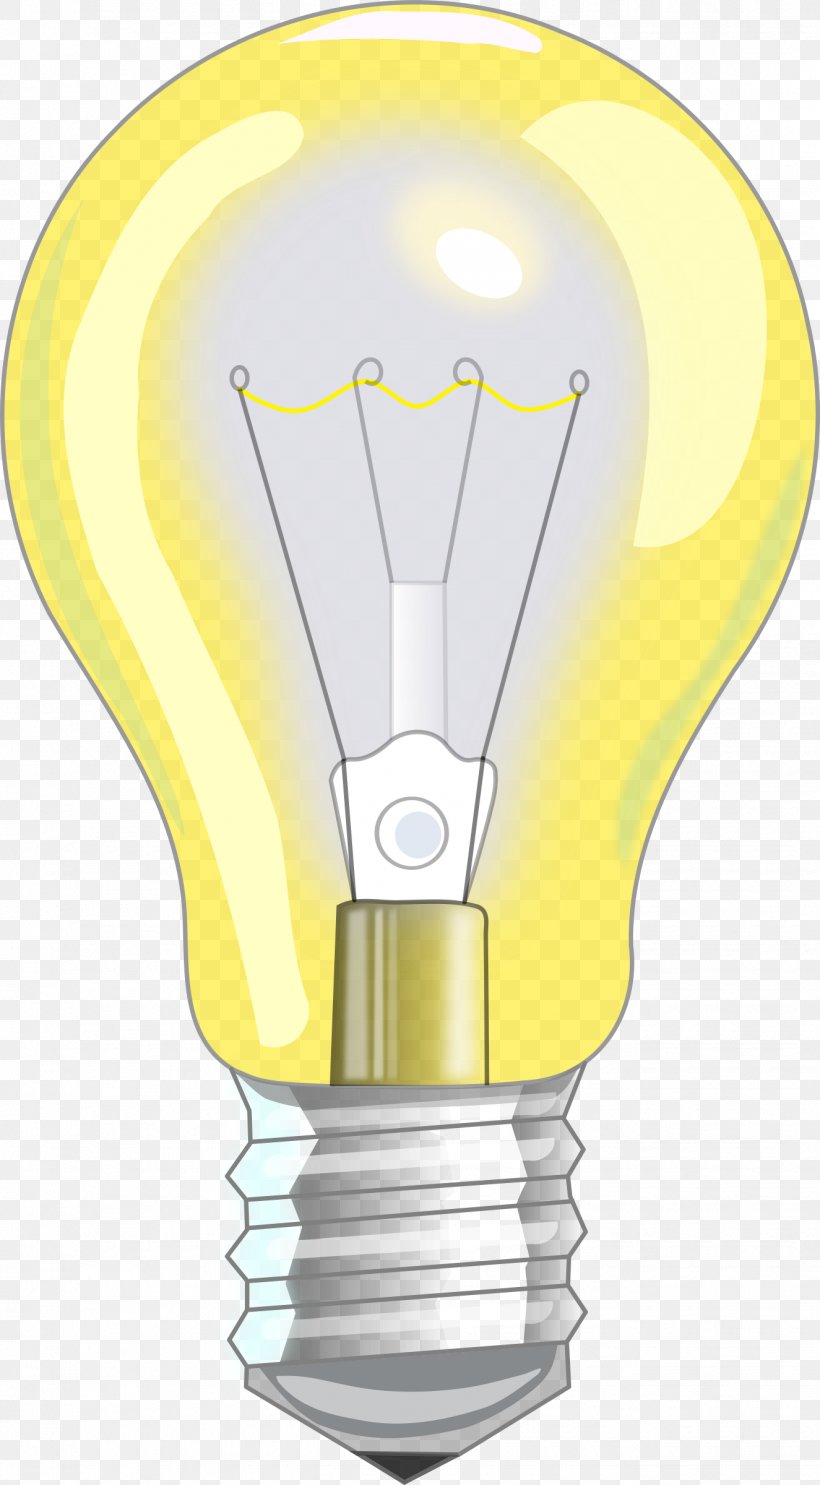 Incandescent Light Bulb Drawing Light Fixture Lamp, PNG, 1325x2400px, Light, Compact Fluorescent Lamp, Drawing, Electricity, Energy Download Free